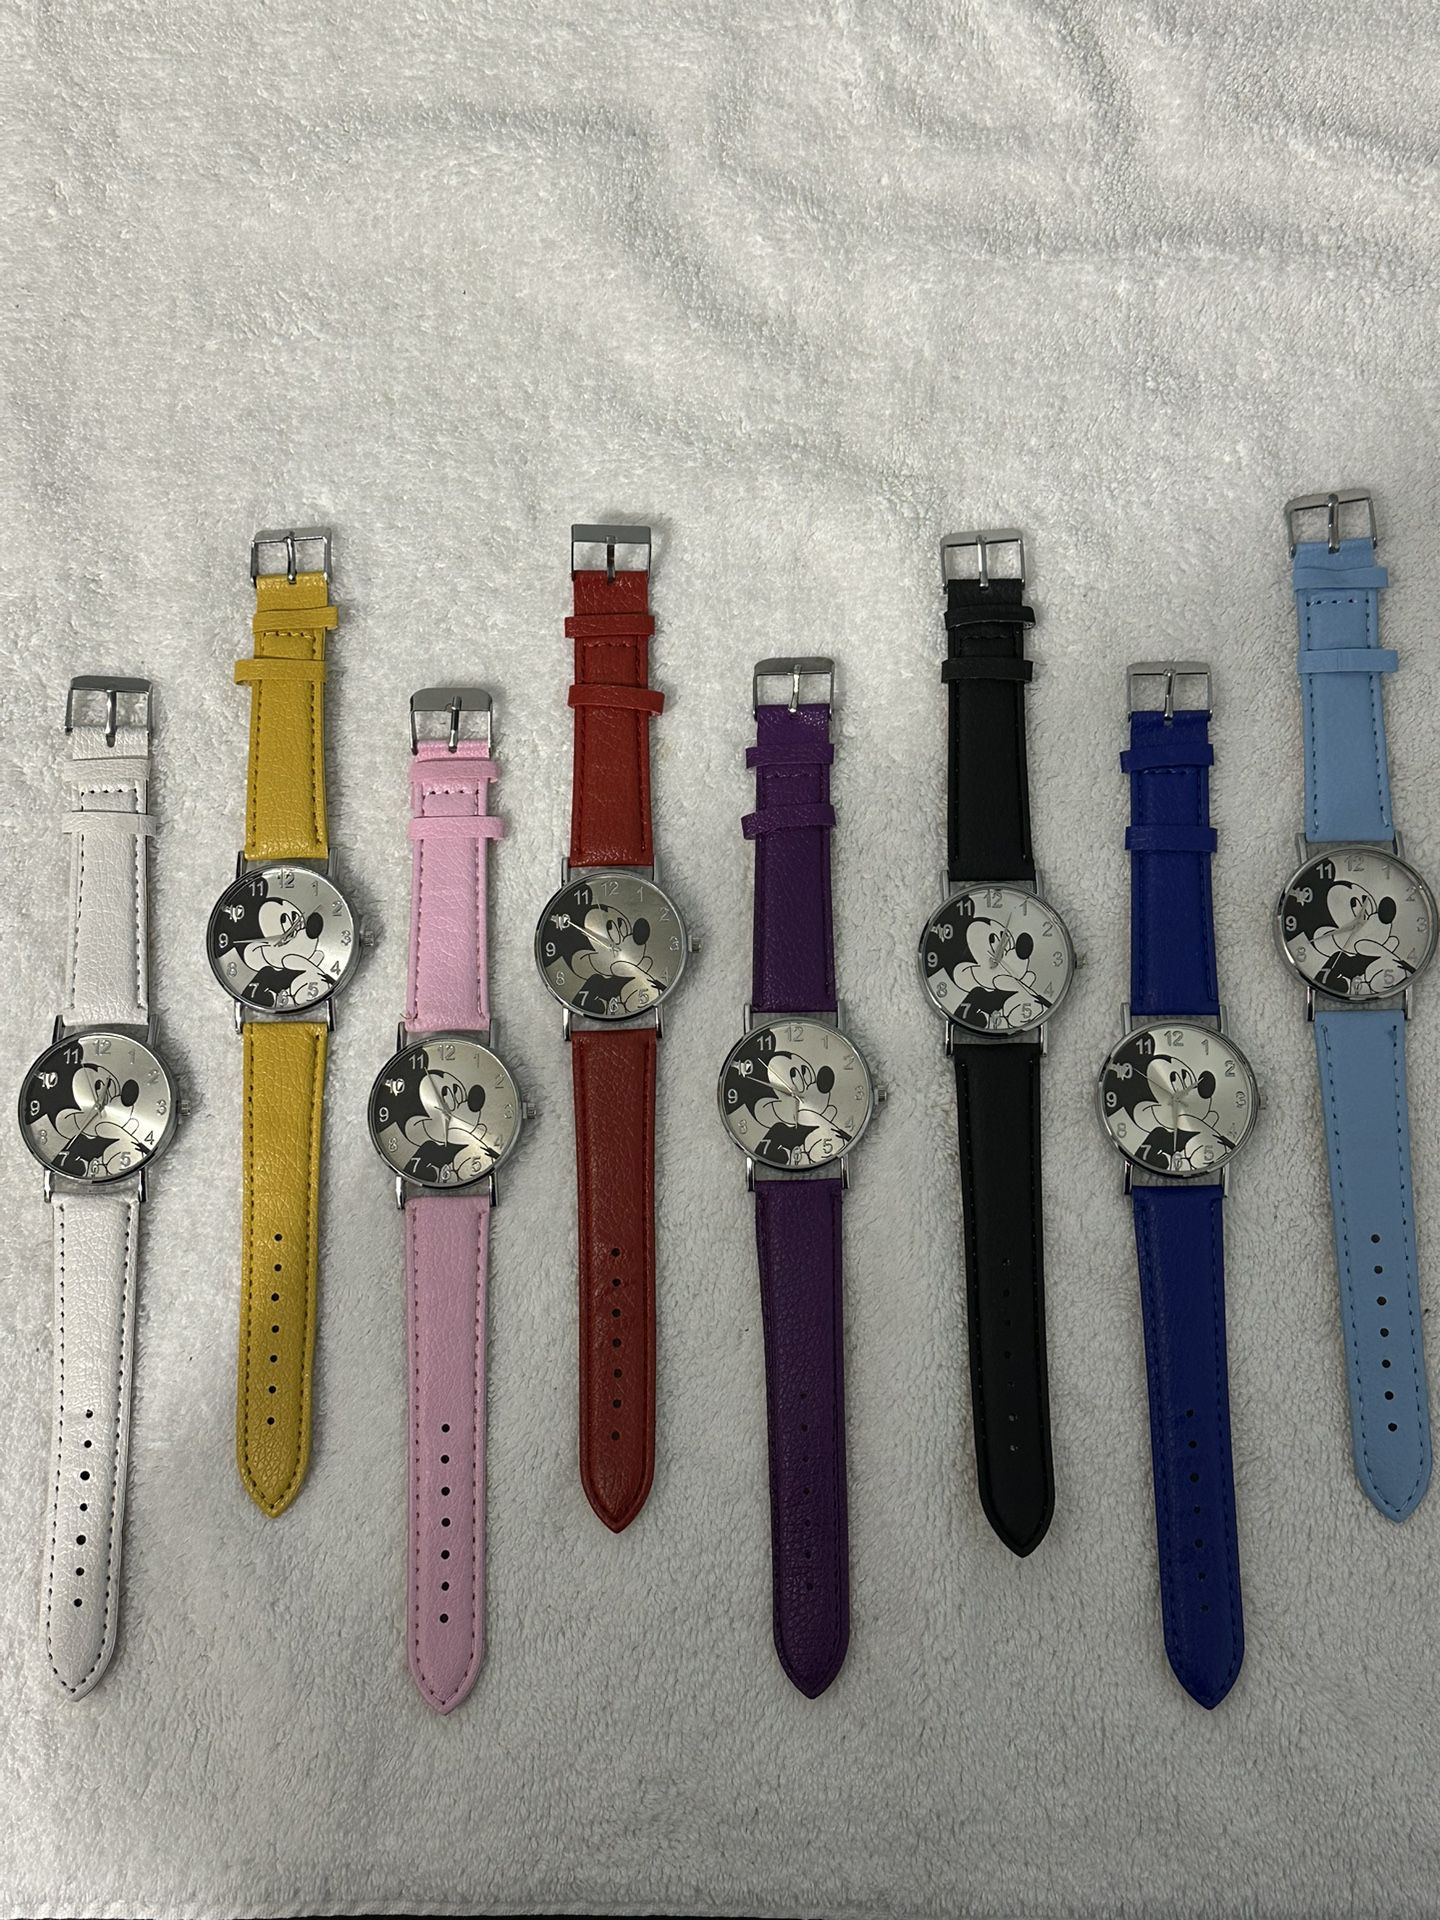 Lot of Mickey Watches- One Of Each Color- New